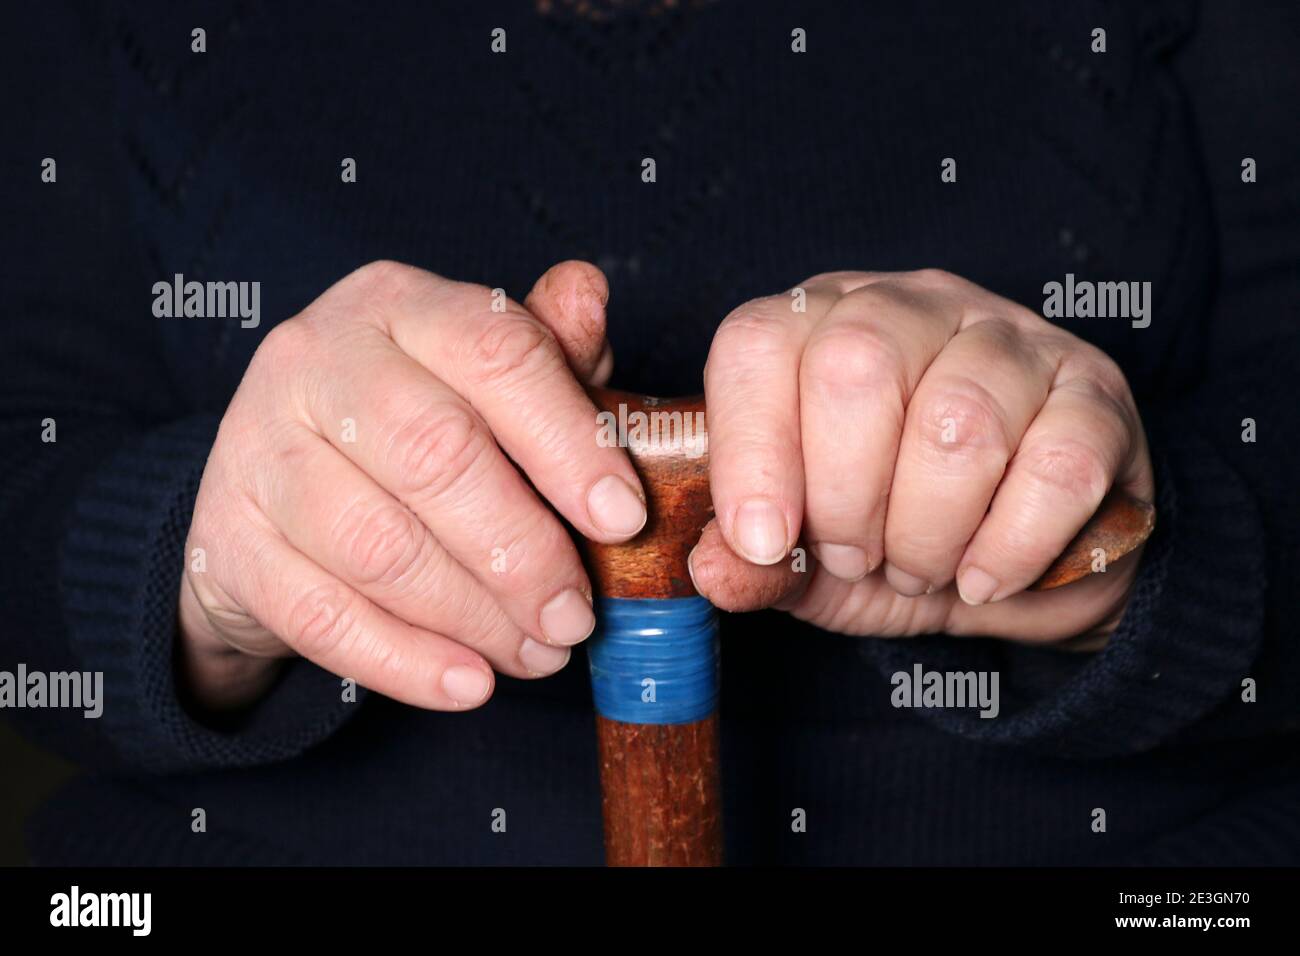 Senior woman's hands on old walking stick with t shaped handles. The concept of old age, loneliness, solicitude and caring for the elderly. Stock Photo